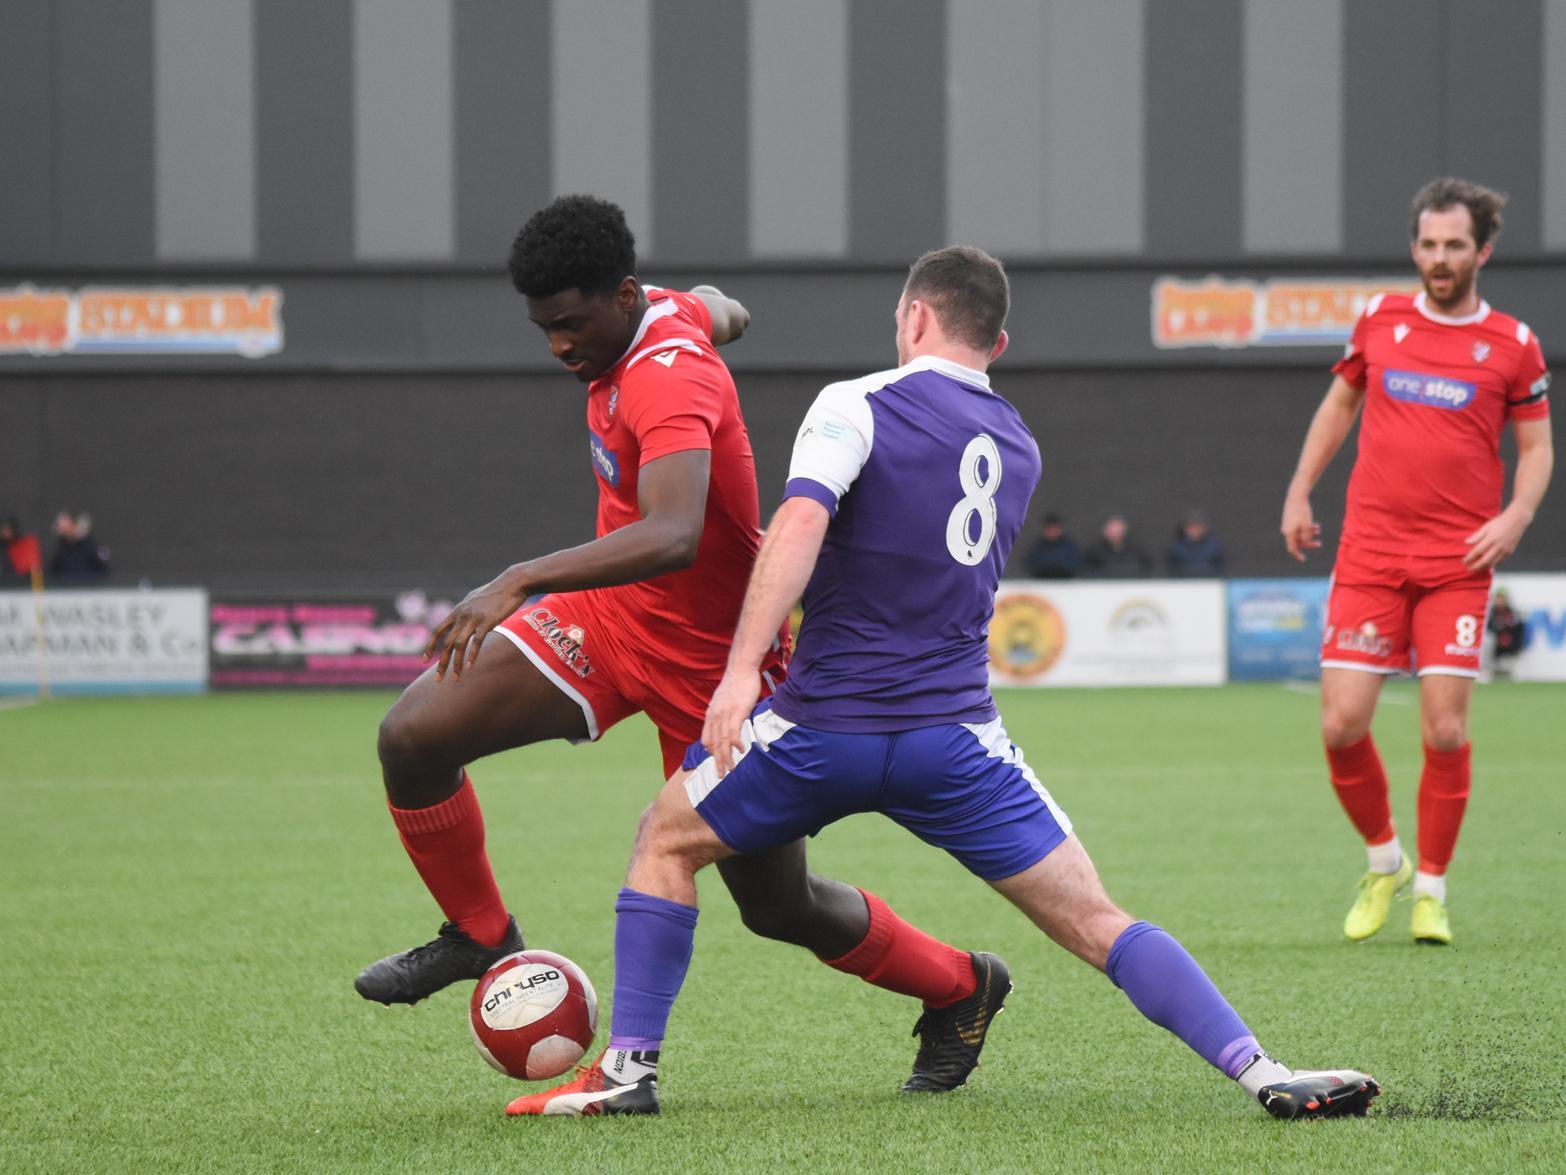 Scarborough Athletic 3-1 Ashton United / Pictures by Morgan Exley